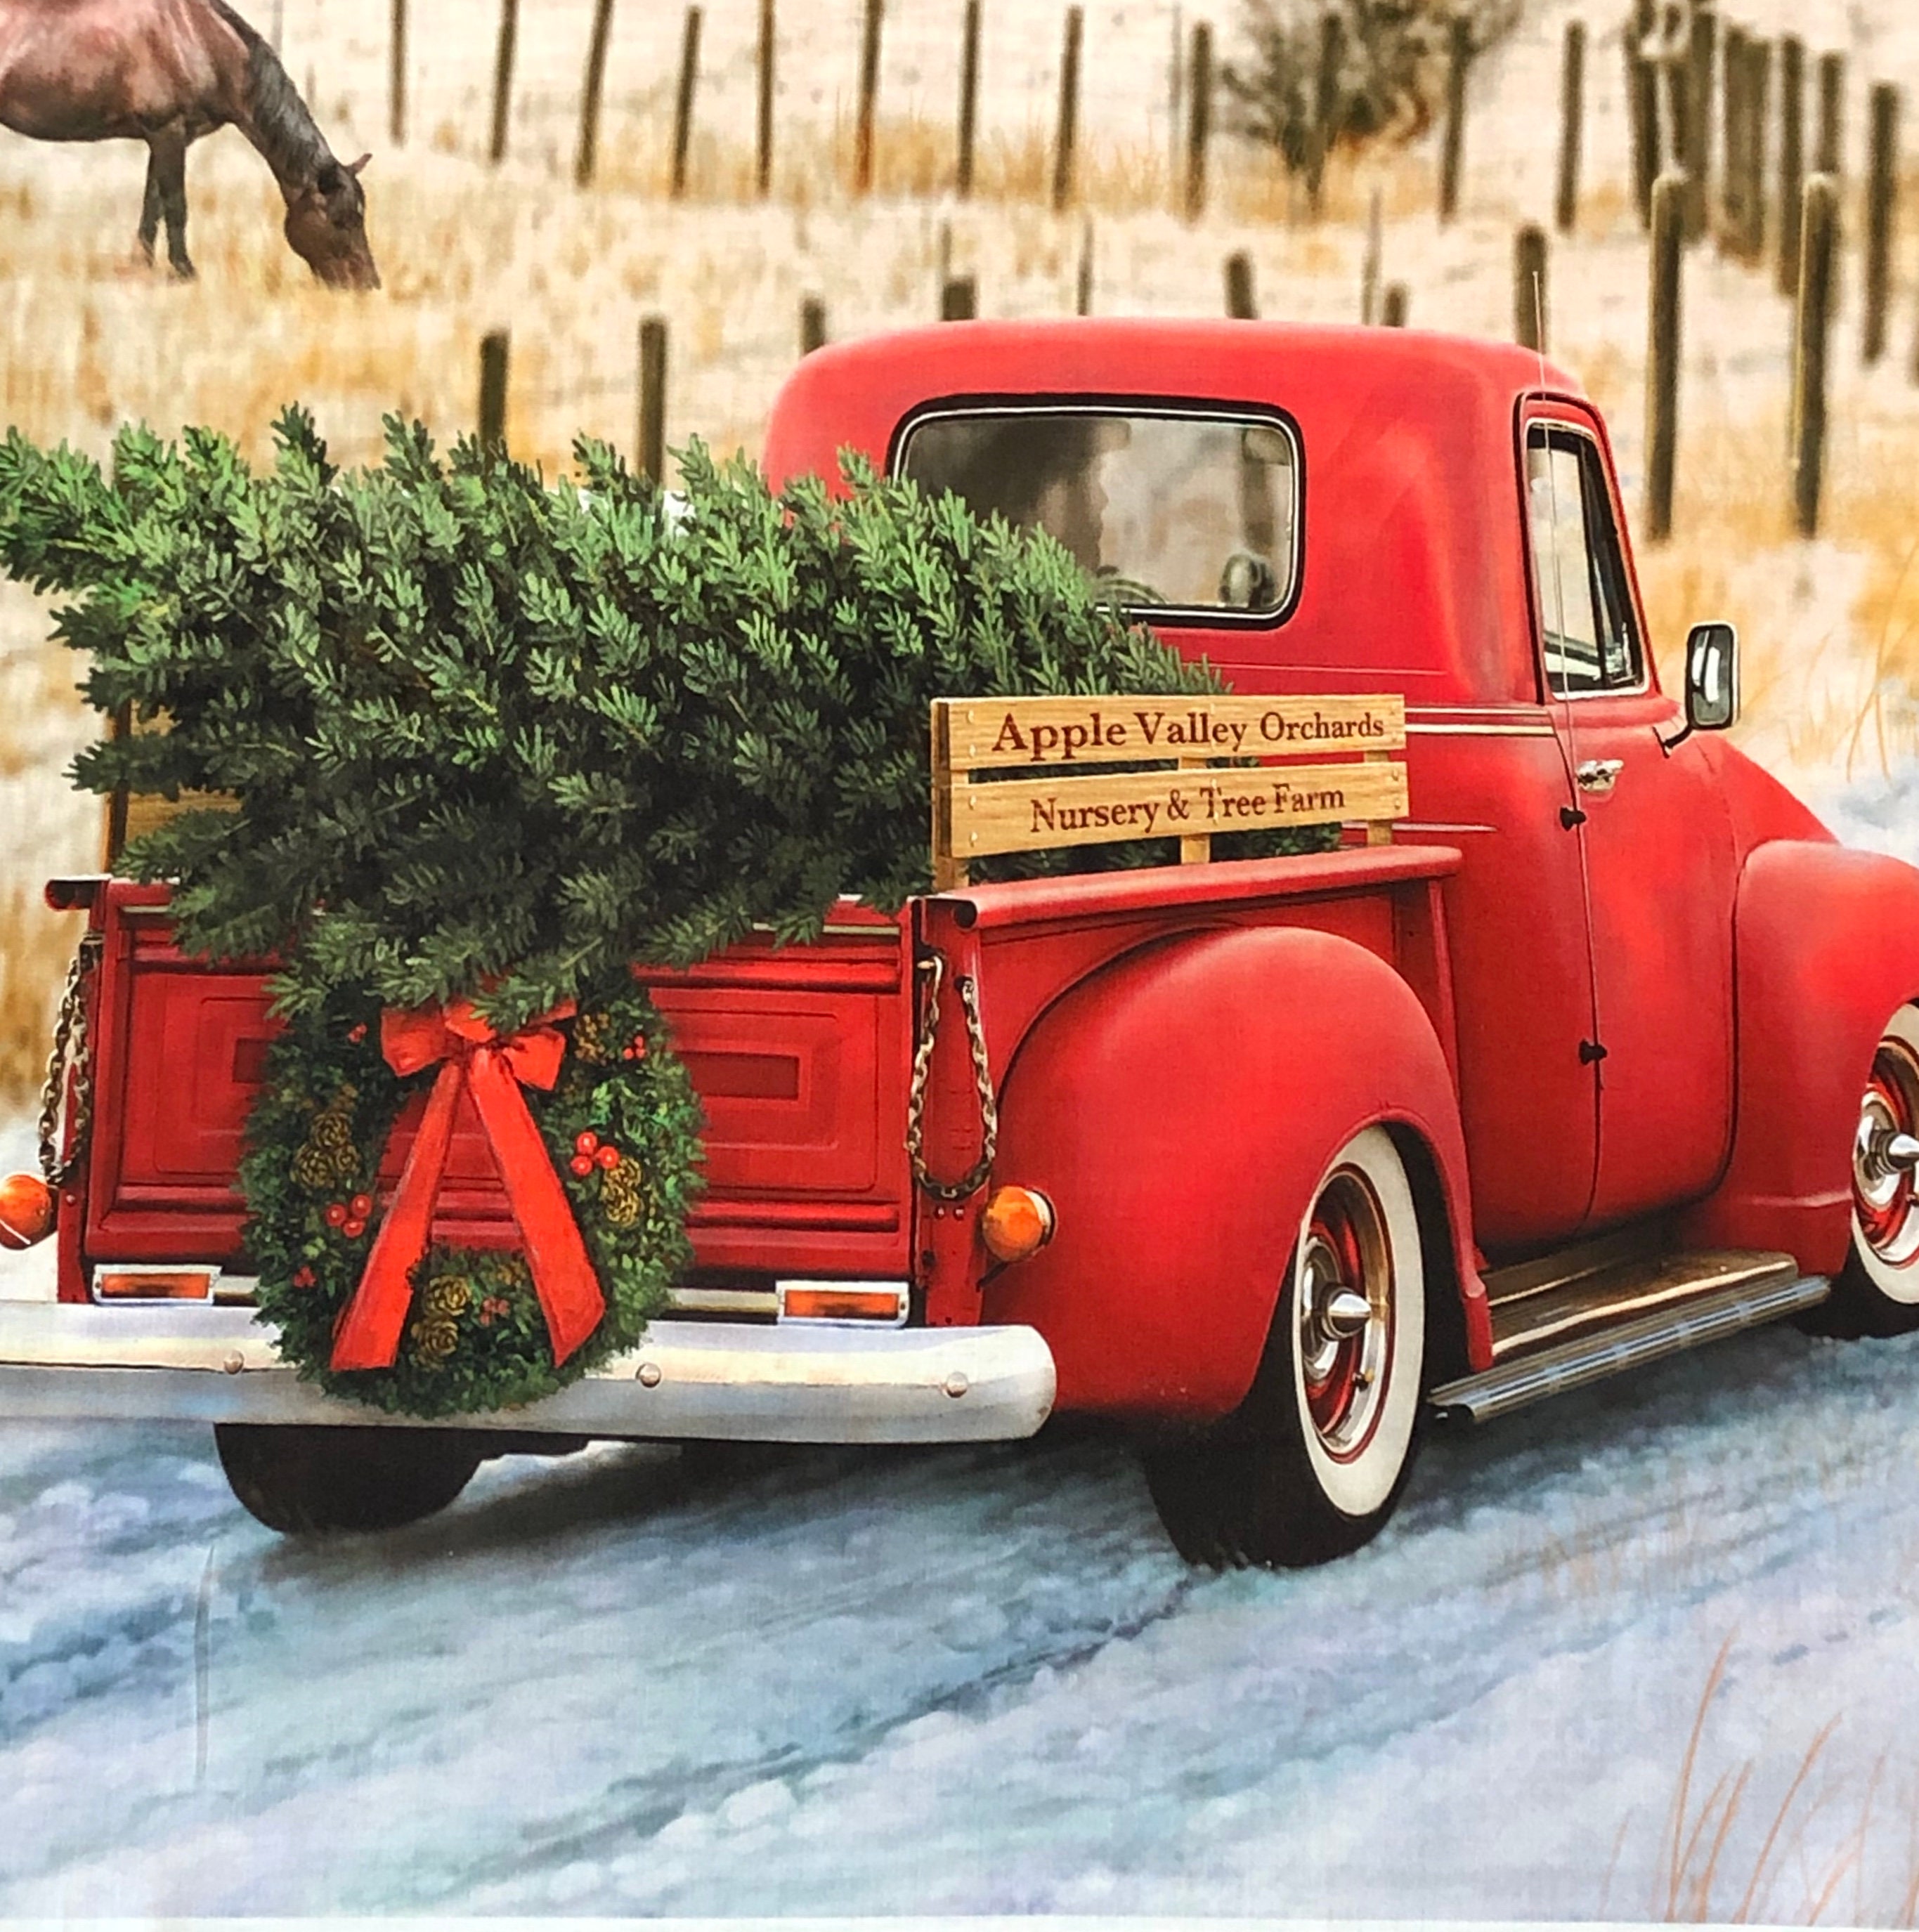 Albums 98+ Pictures Christmas Pictures With Red Truck Sharp